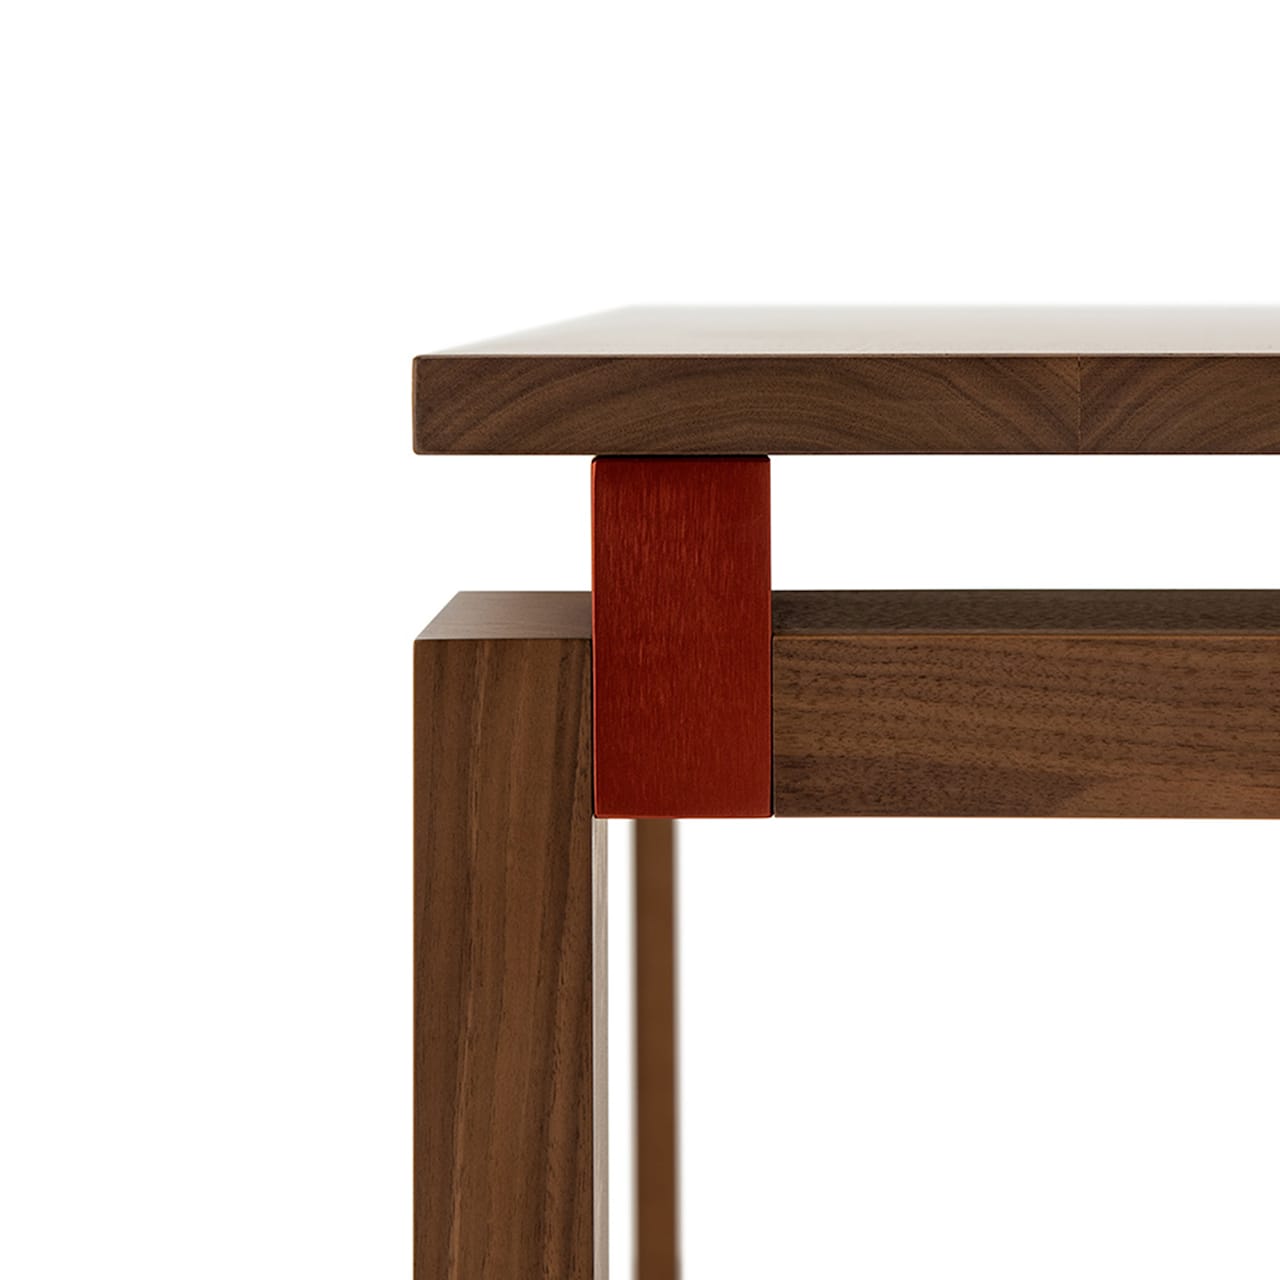 Parallel Structure Wood Table